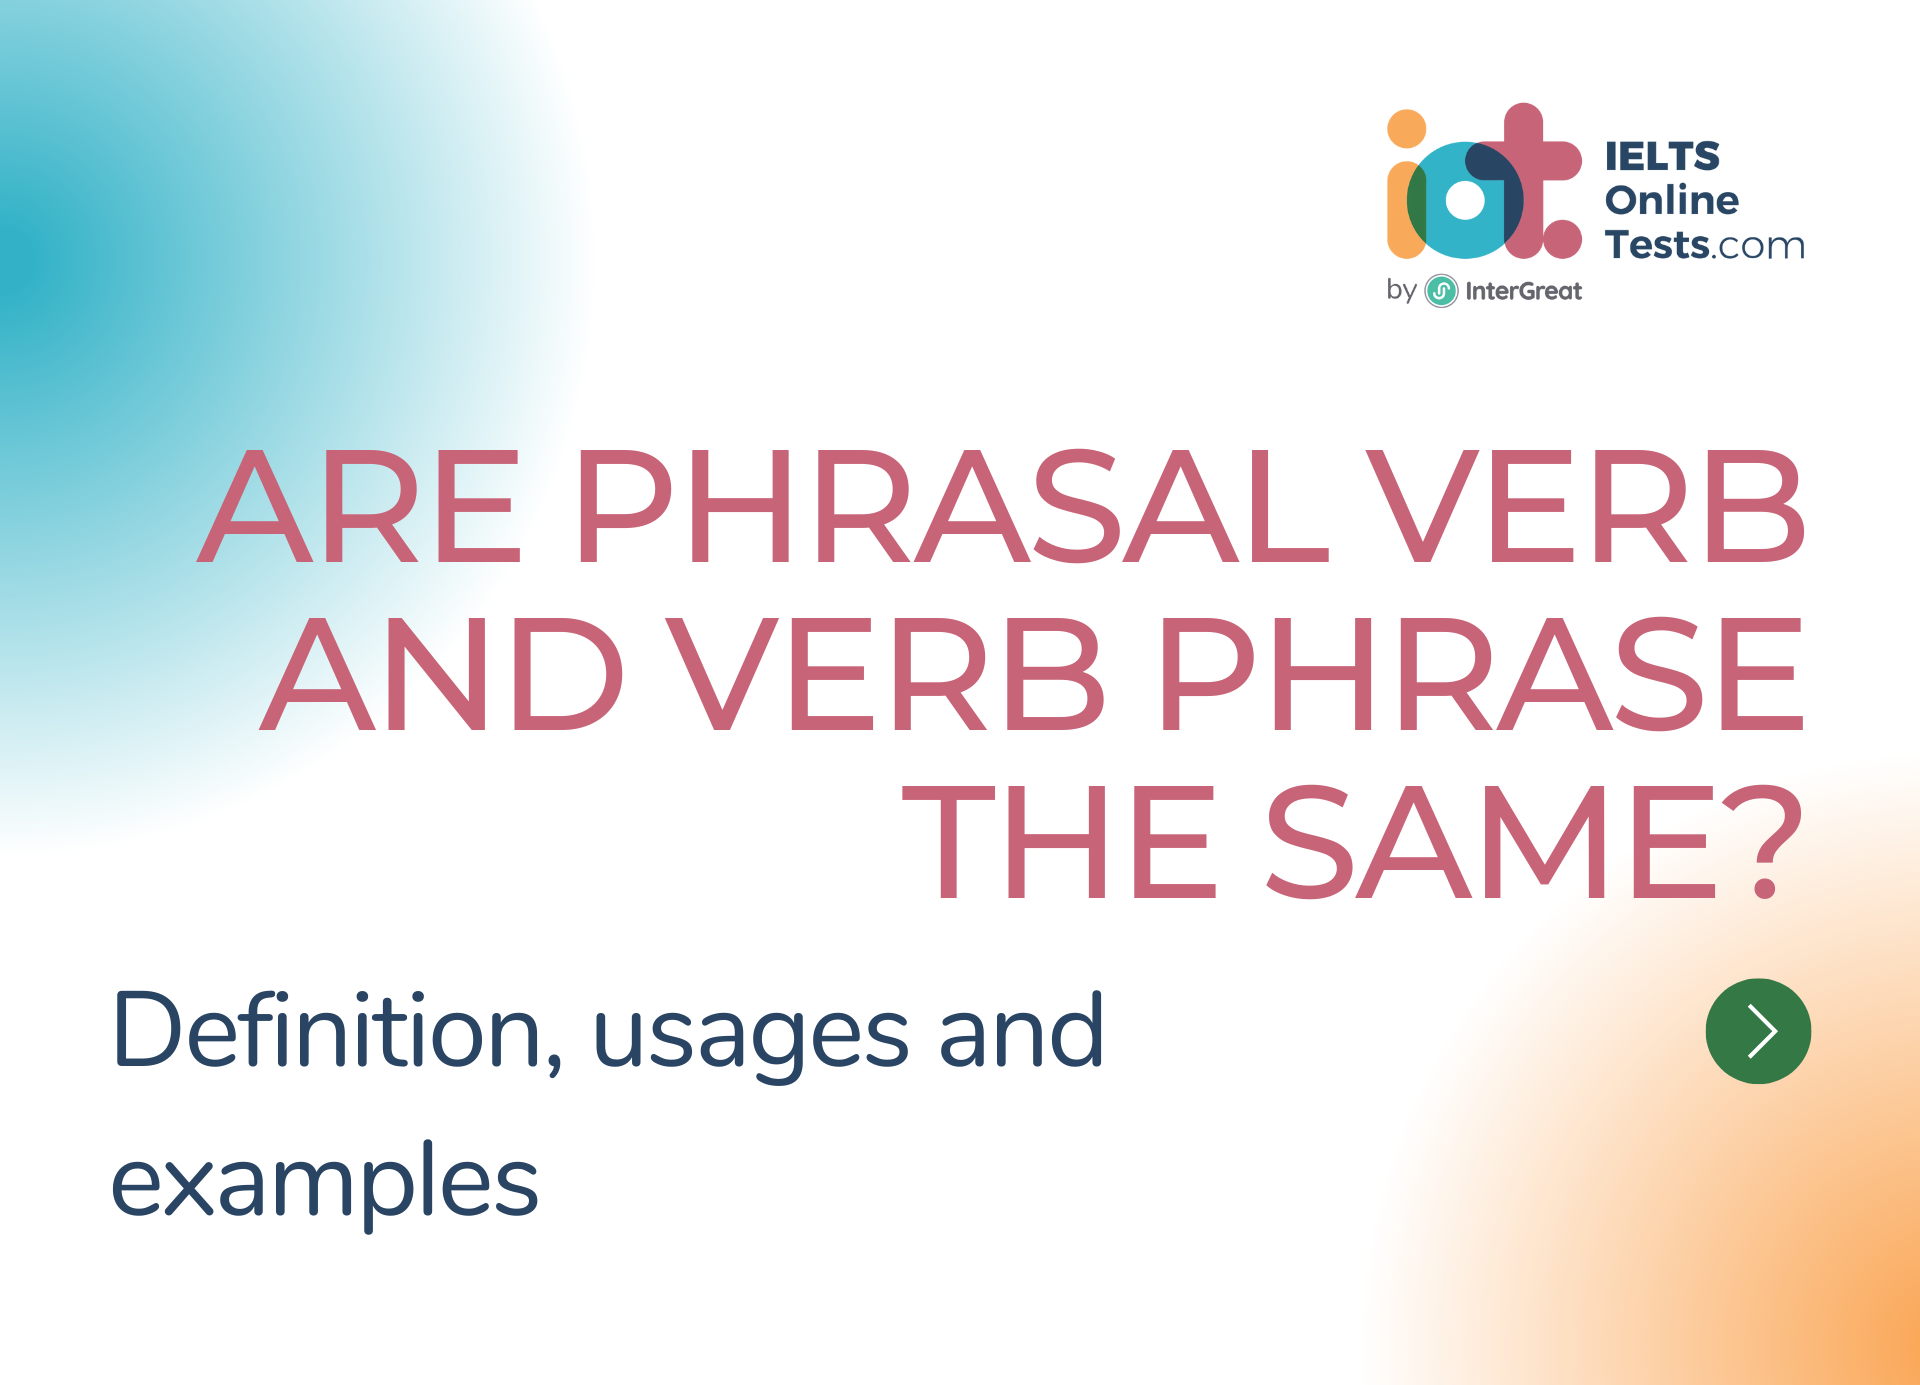 Are Phrasal Verb and Verb Phrase the same?